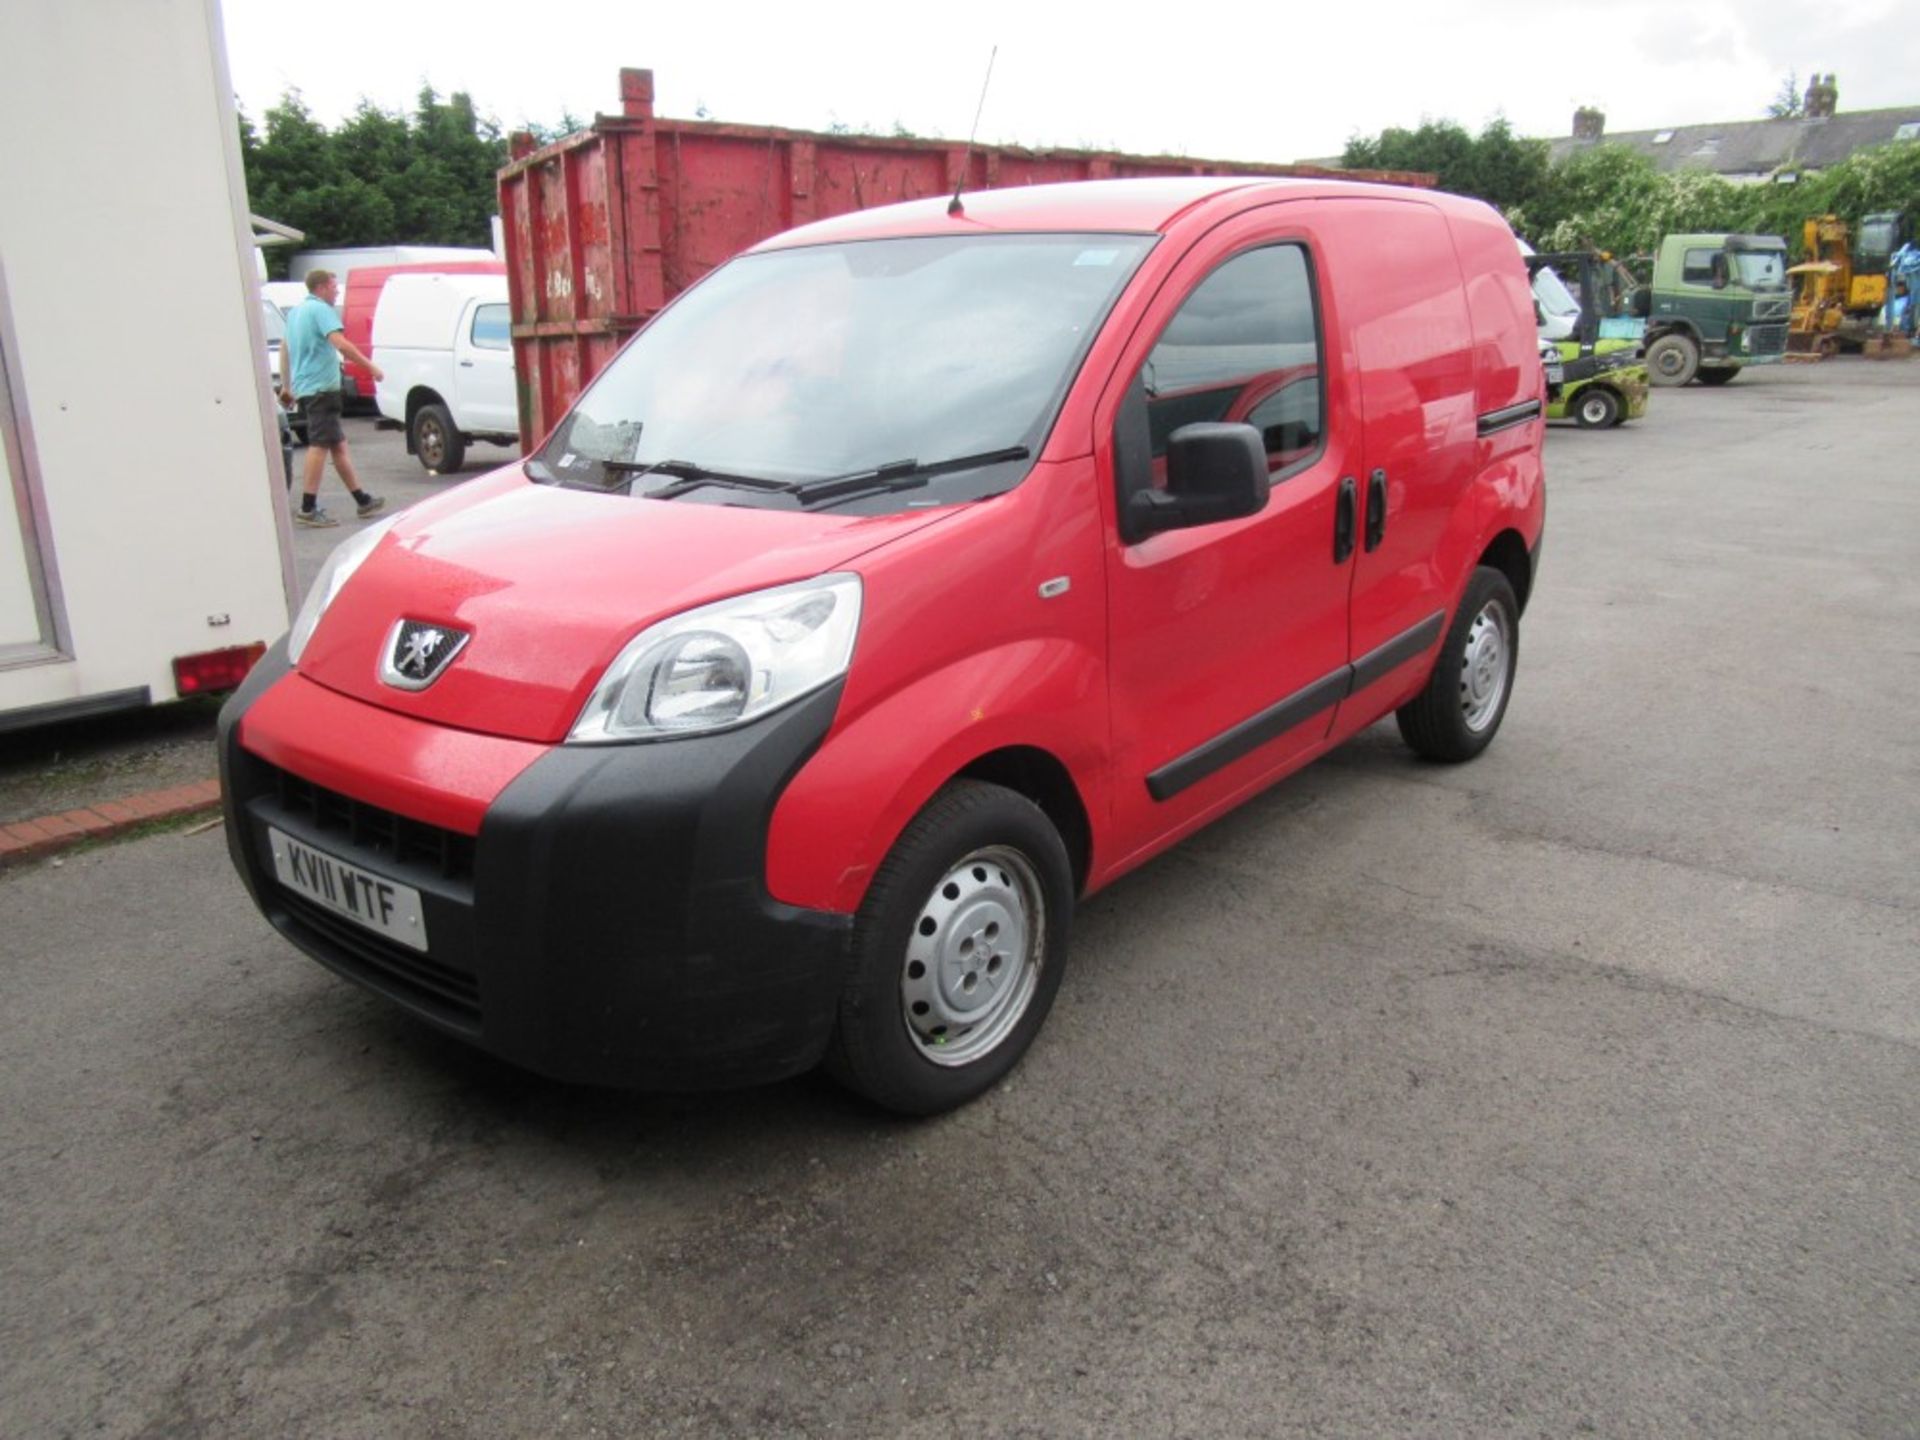 11 reg PEUGEOT BIPPER S HDI, 1ST REG 03/11, TEST 02/20, 54277M WARRANTED, V5 HERE, 1 OWNER FROM - Image 2 of 5